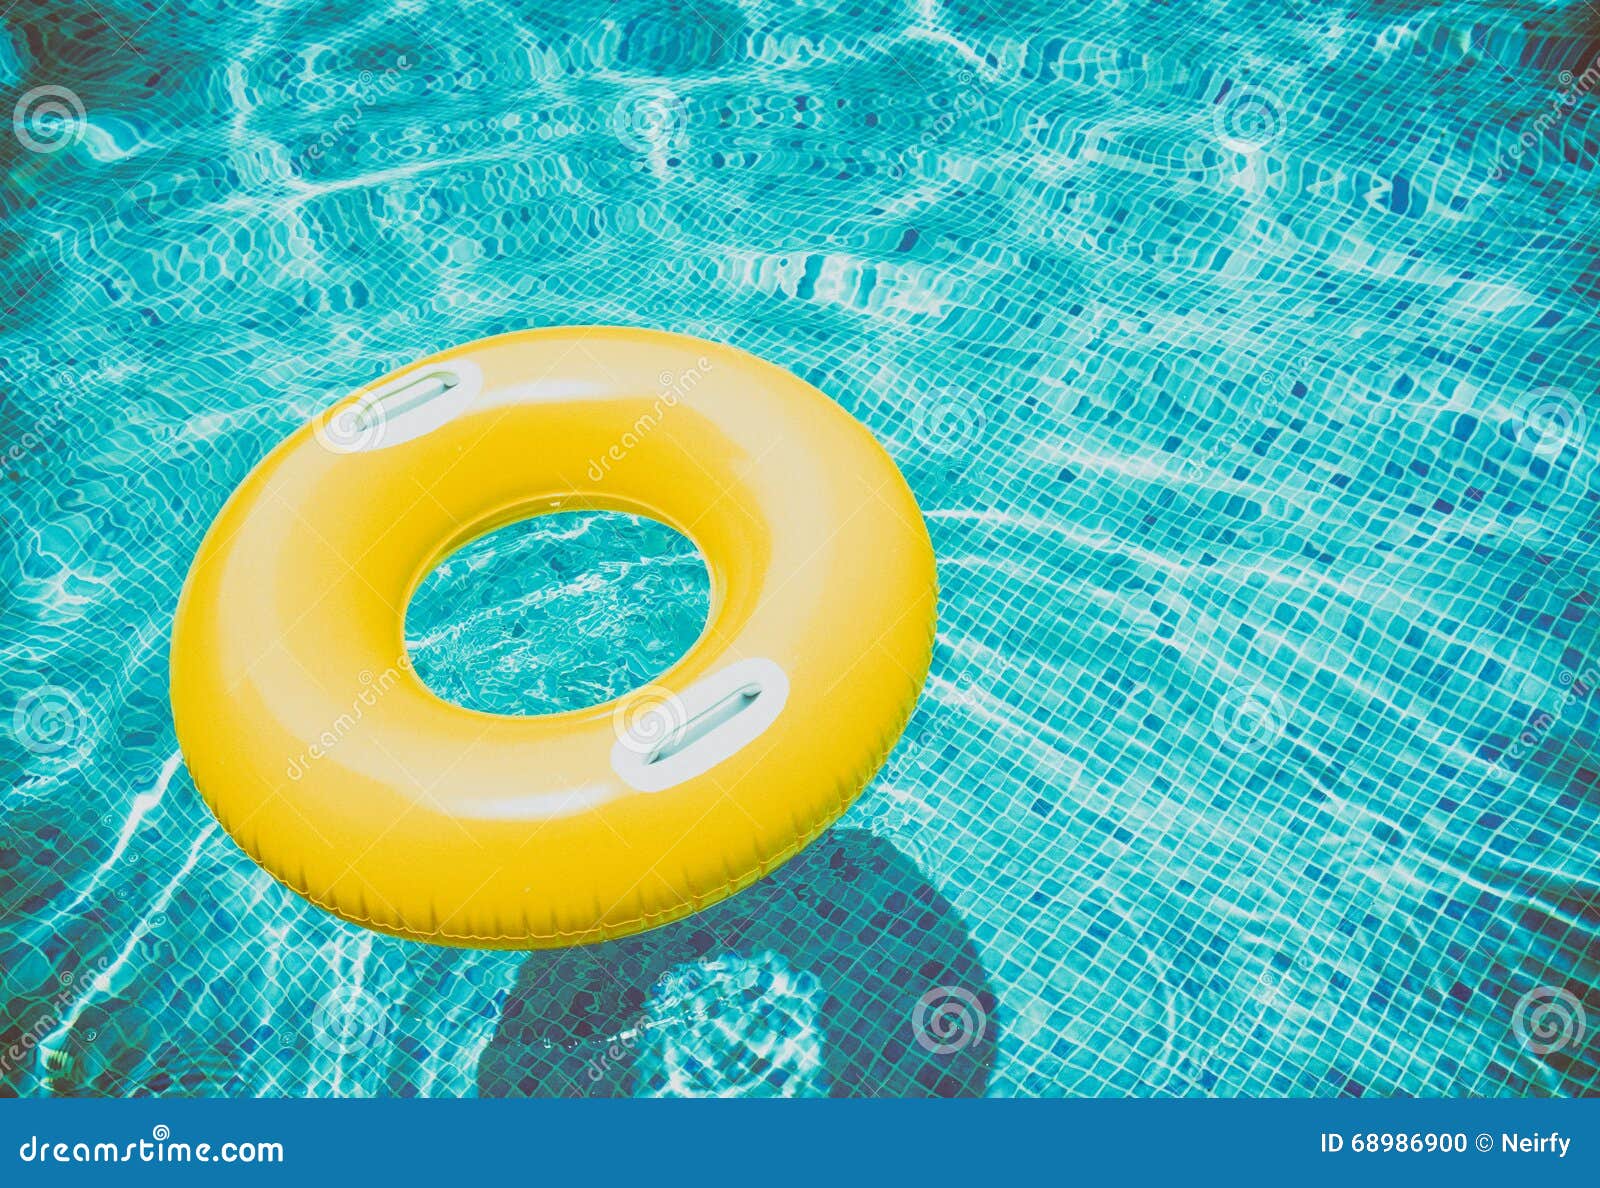 Rubber ring in pool stock photo. Image of lifeguard, rubber - 68986900